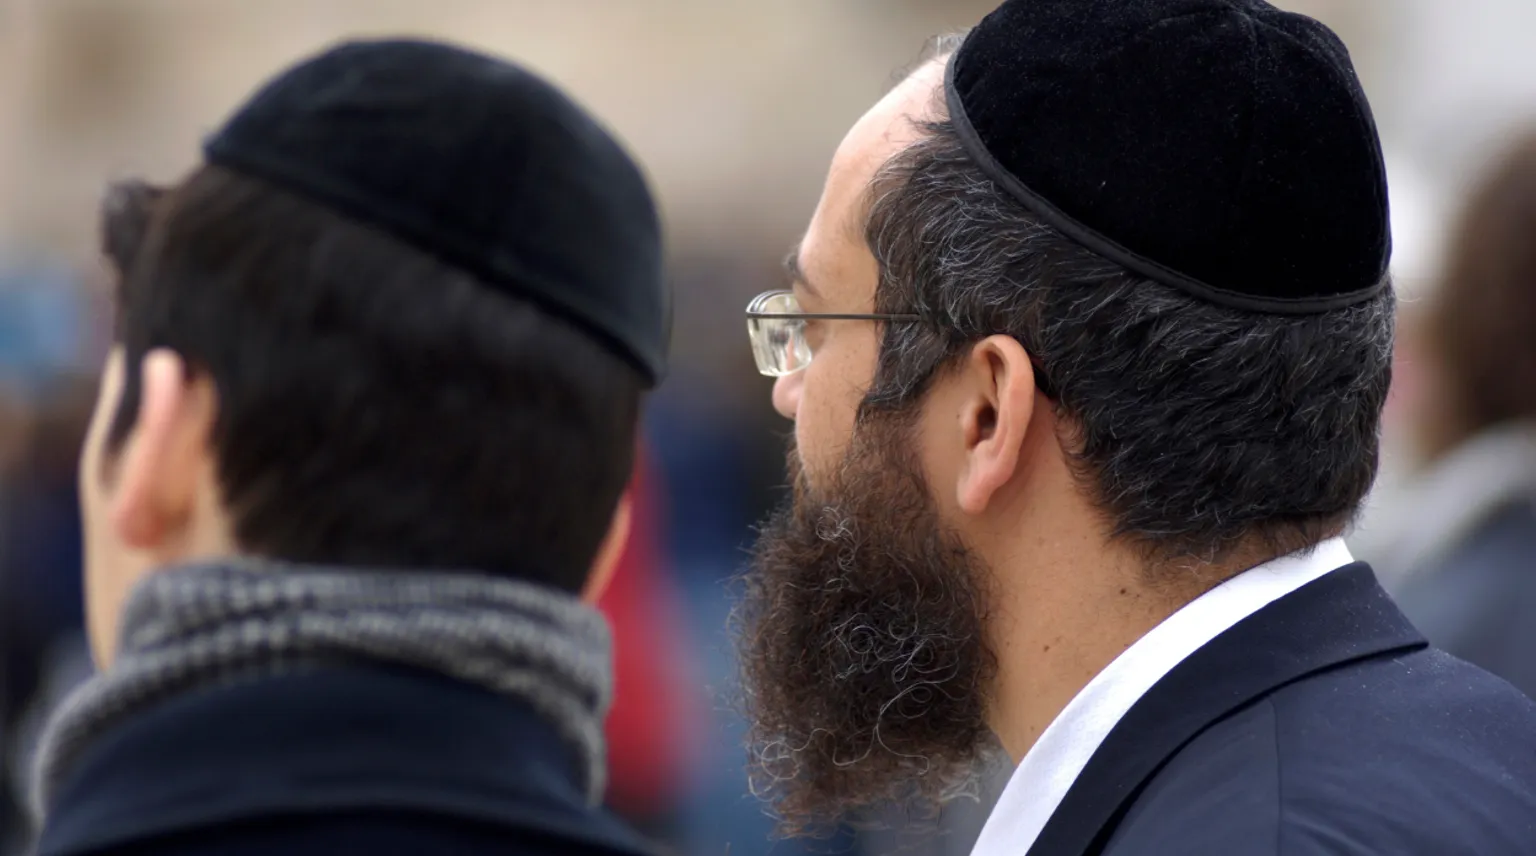 Are Jews Hated in Islam?